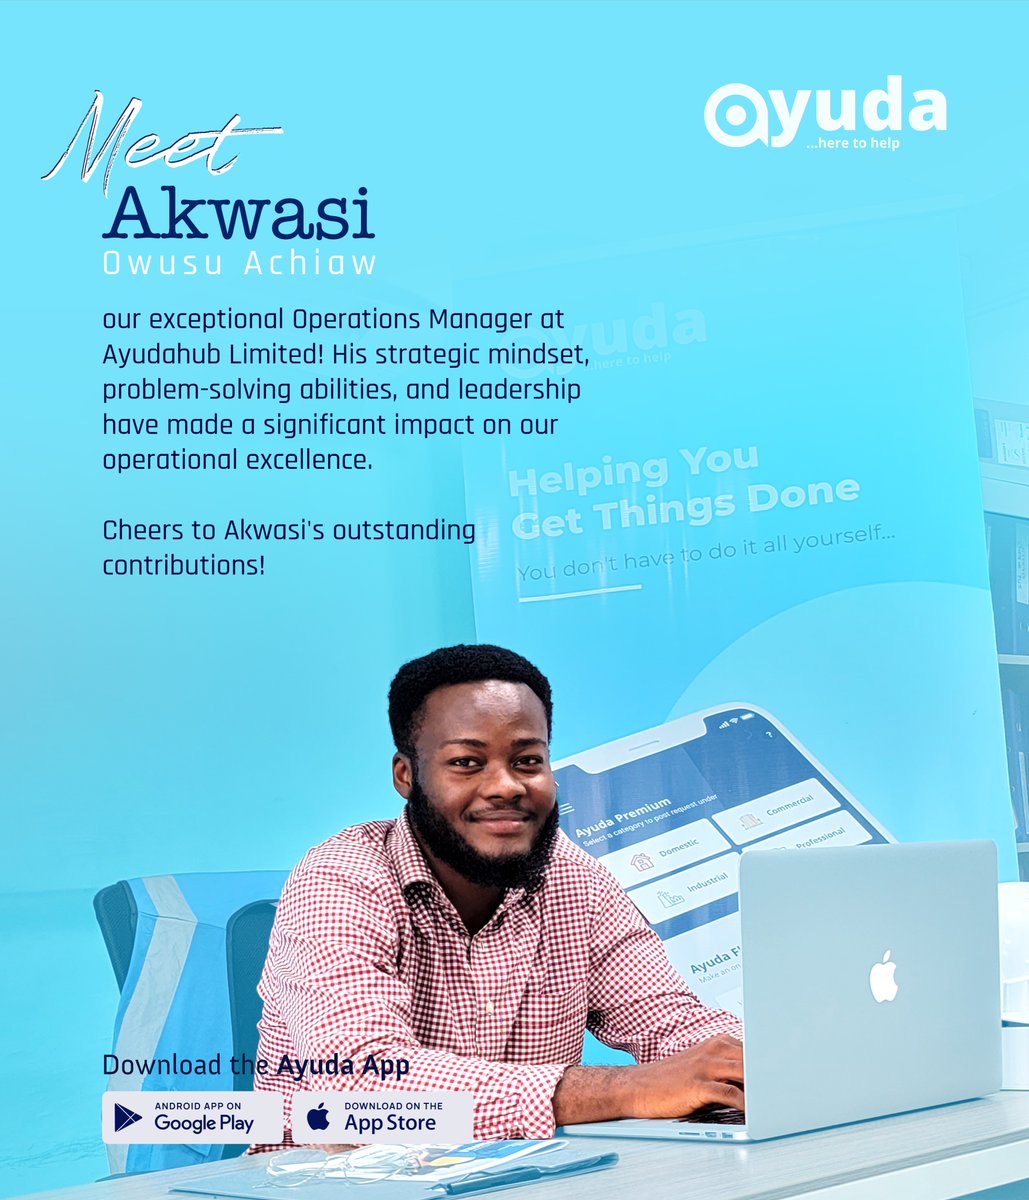 Meet Akwasi Owusu Achiaw, our exceptional Operations Manager at Ayudahub Limited! 

#EmployeeHighlight #OperationsManager #AyudahubLimited #AyudaApp #OperationalExcellence #Leadership #ProblemSolver